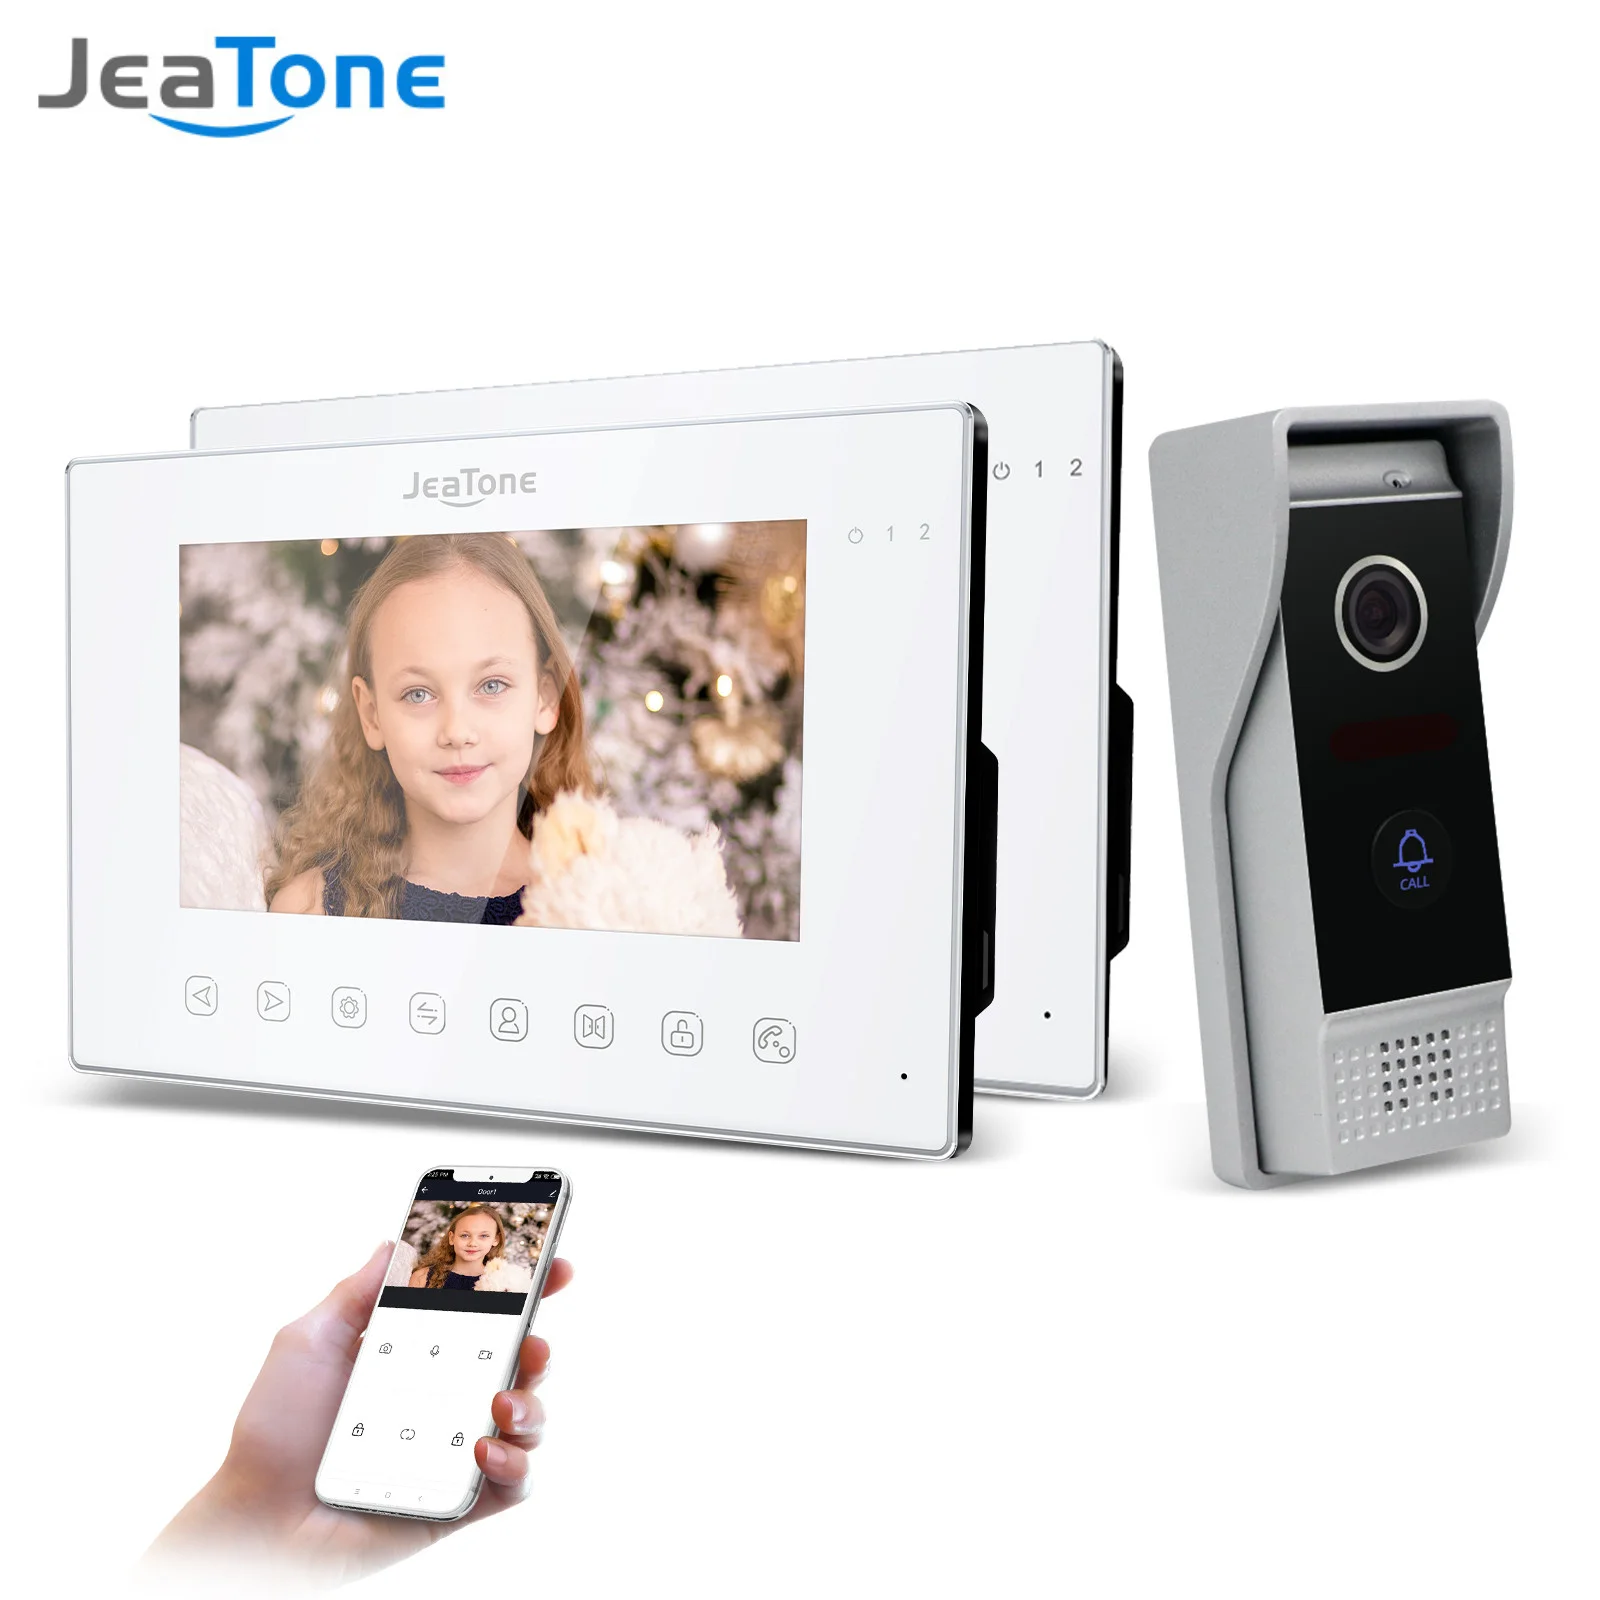 Jeatone 7'' Tuya 1080P Wireless Video Intercom For Home With 2 Monitor + 1 Doorbell Camera Outdoor System Motion Detection enlarge